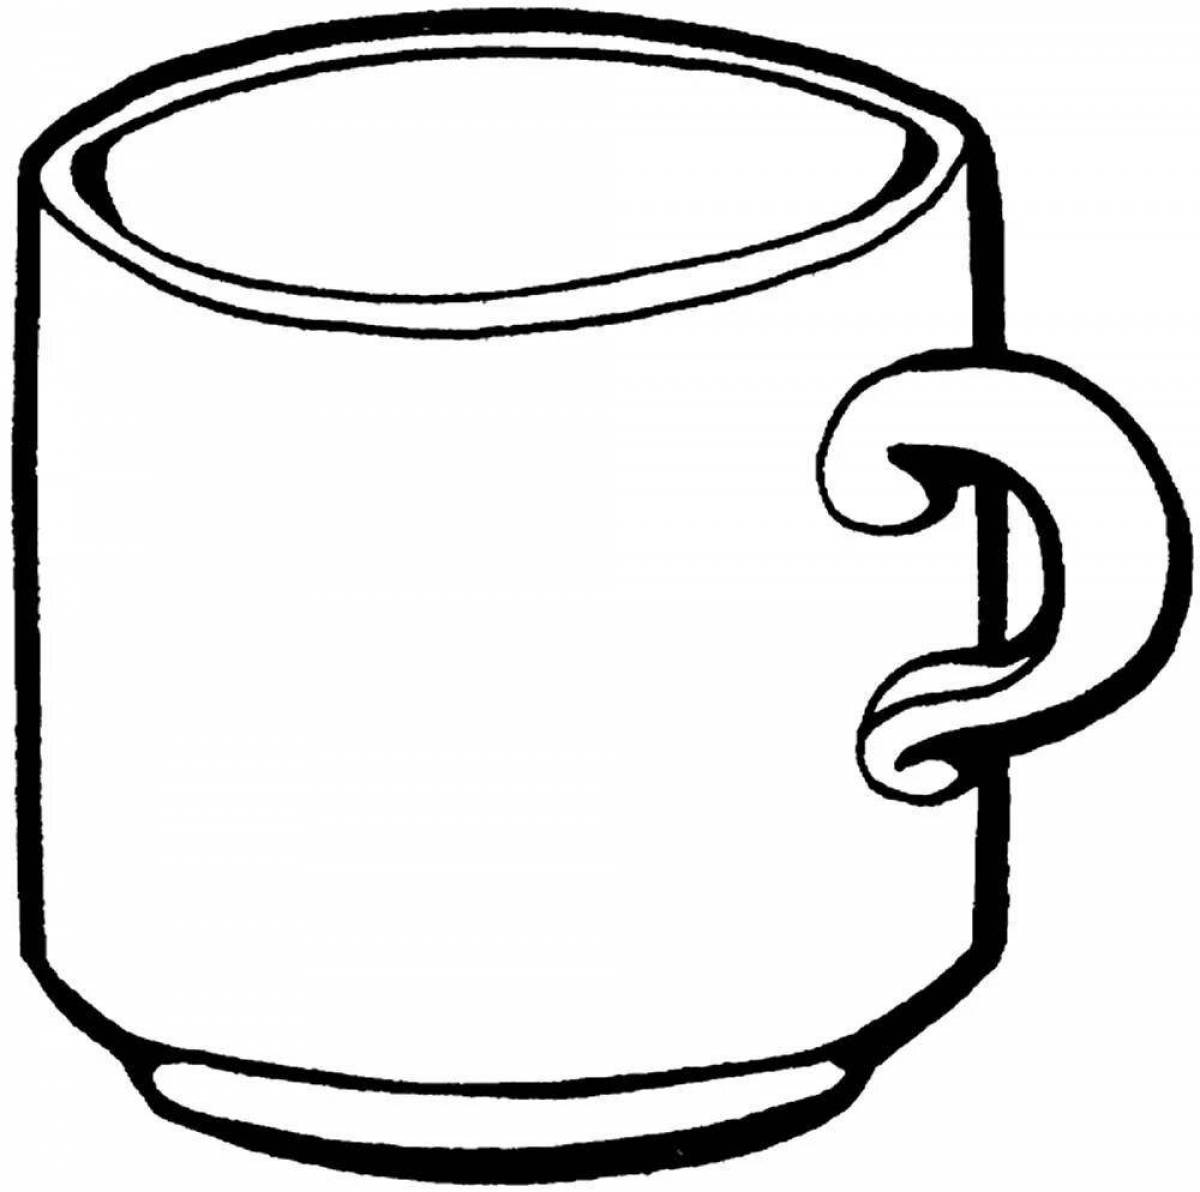 Coloring page elegant mugs and cups